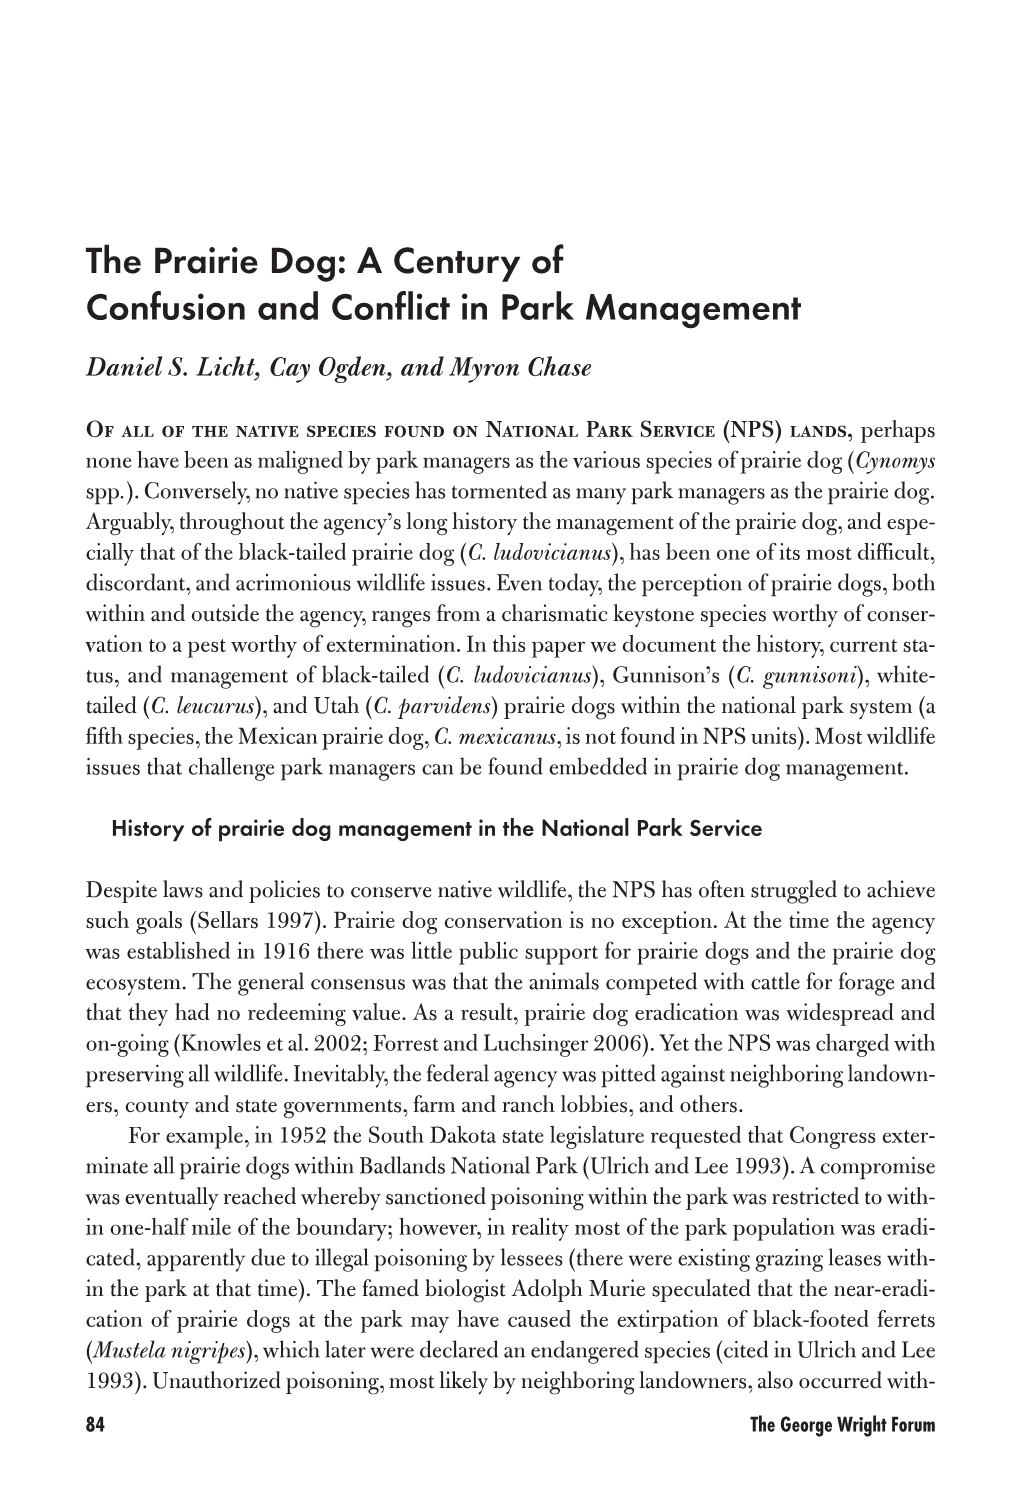 The Prairie Dog: a Century of Confusion and Conflict in Park Management